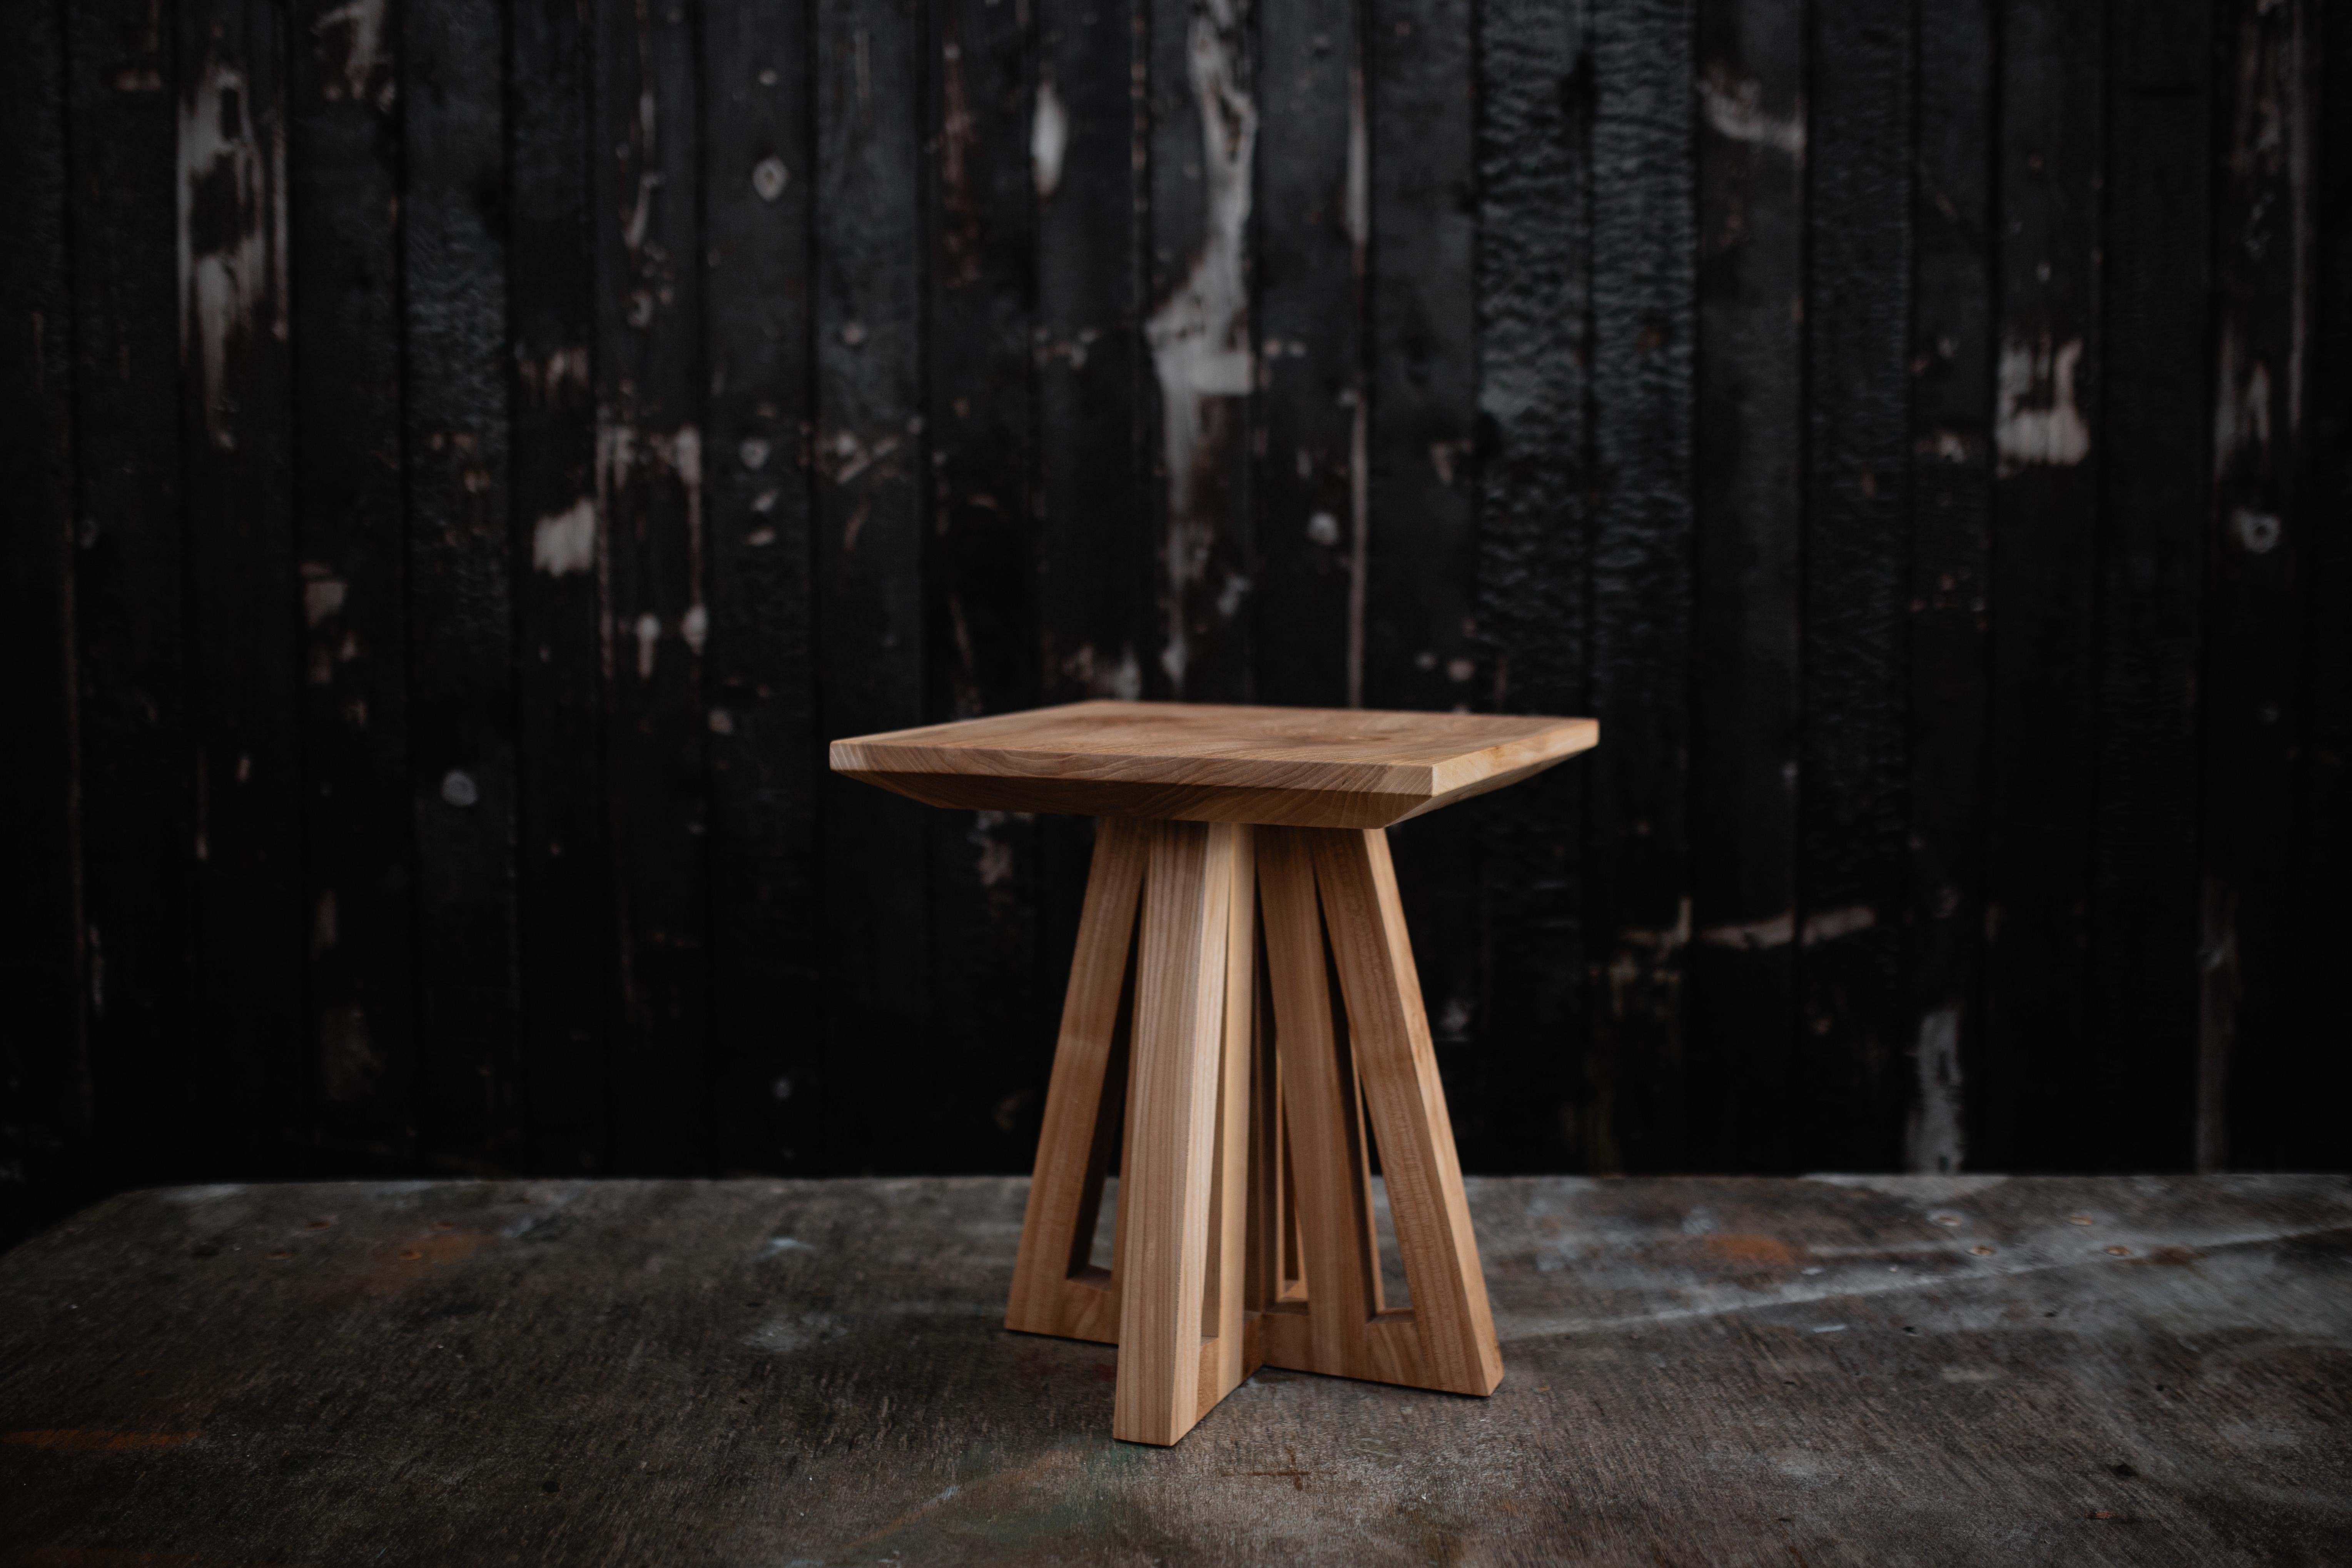 Imani side table by Albert Potgieter Designs
Dimensions: D 40 x H 45 cm
Materials: Elm wood 
Product is customizable.

“Look and Feel designs”, this is the Tagline and the way of designing of Albert Potgieter. Albert was a qualified